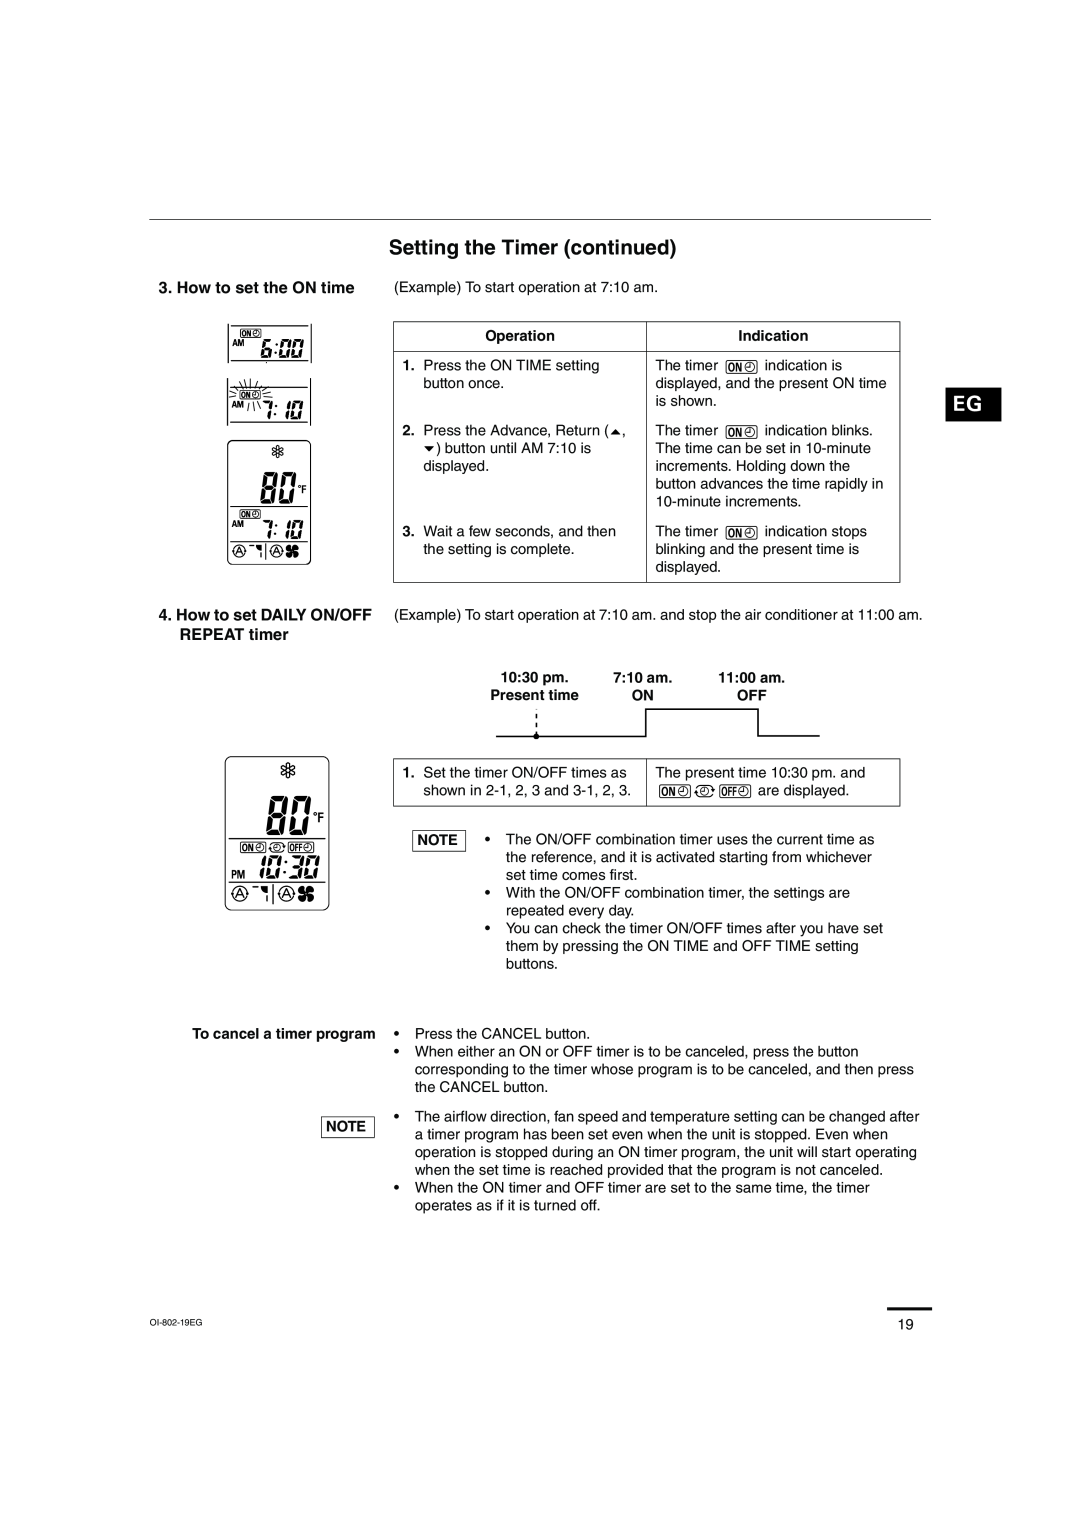 Sanyo KHS0971, KHS1271 instruction manual Setting the Timer continued, REPEAT timer 